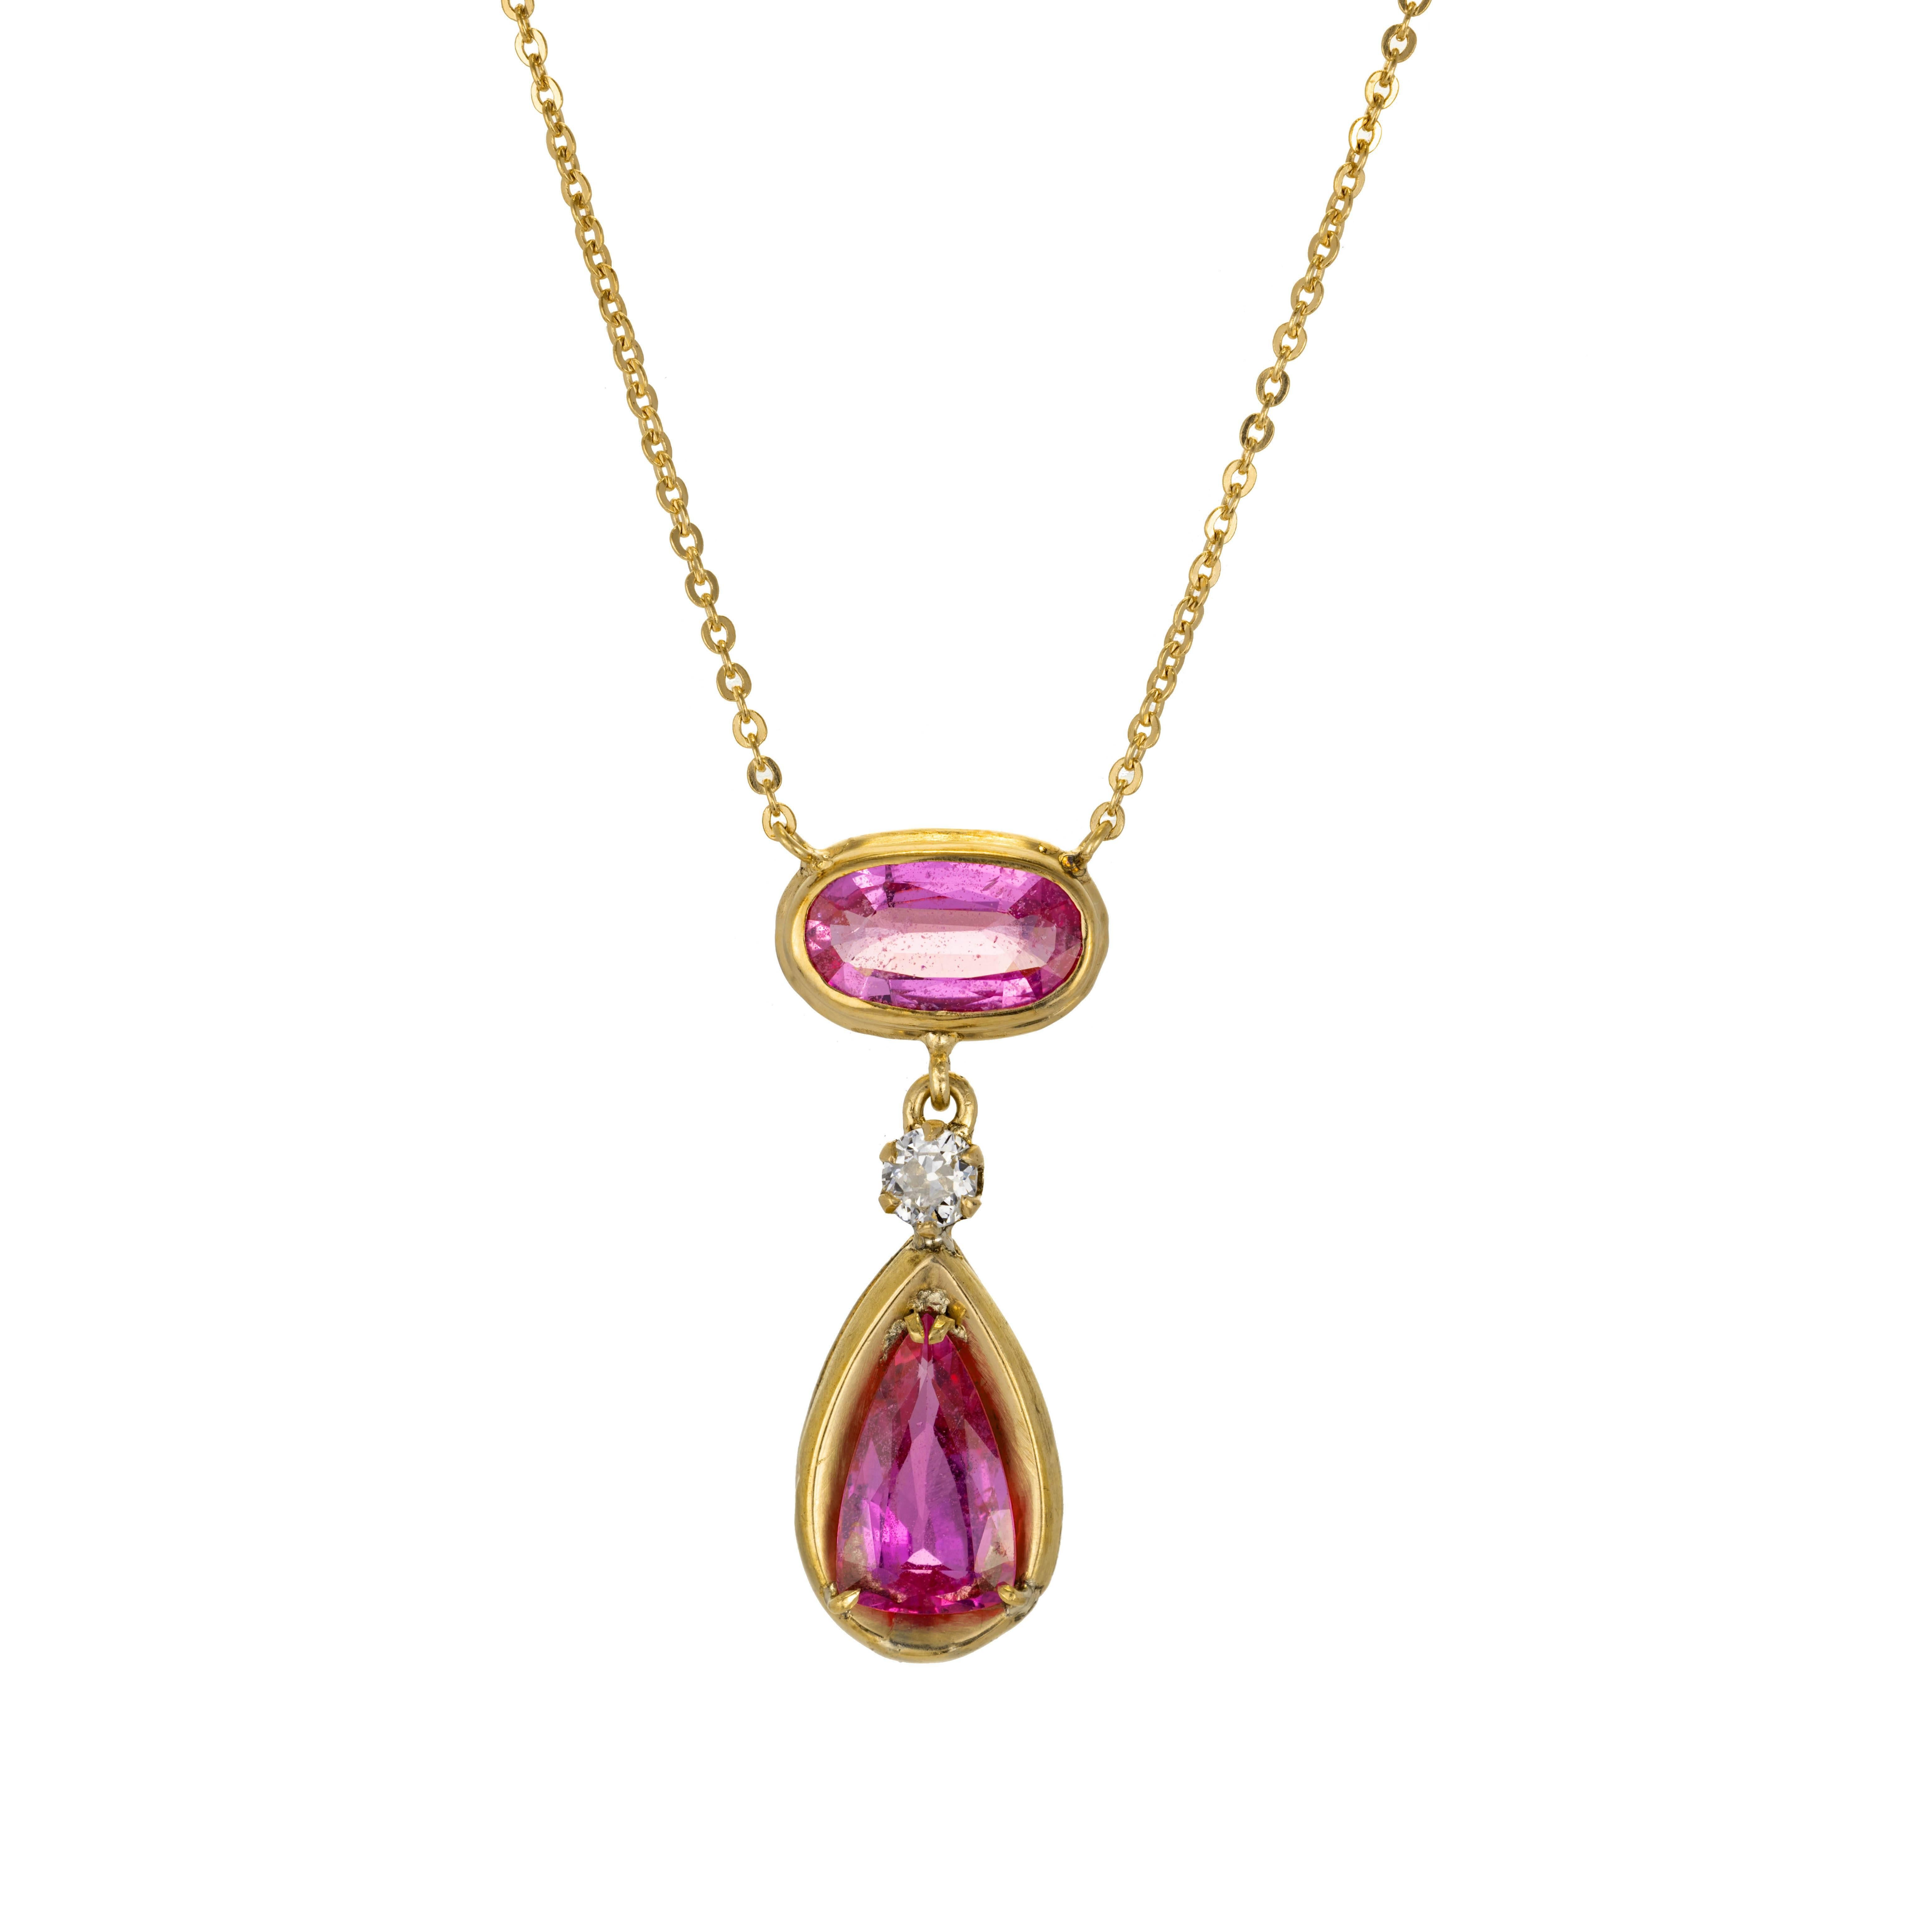 GIA Certified 4.85 Carat Pear Pink Sapphire Diamond Rose Gold Pendant Necklace For Sale